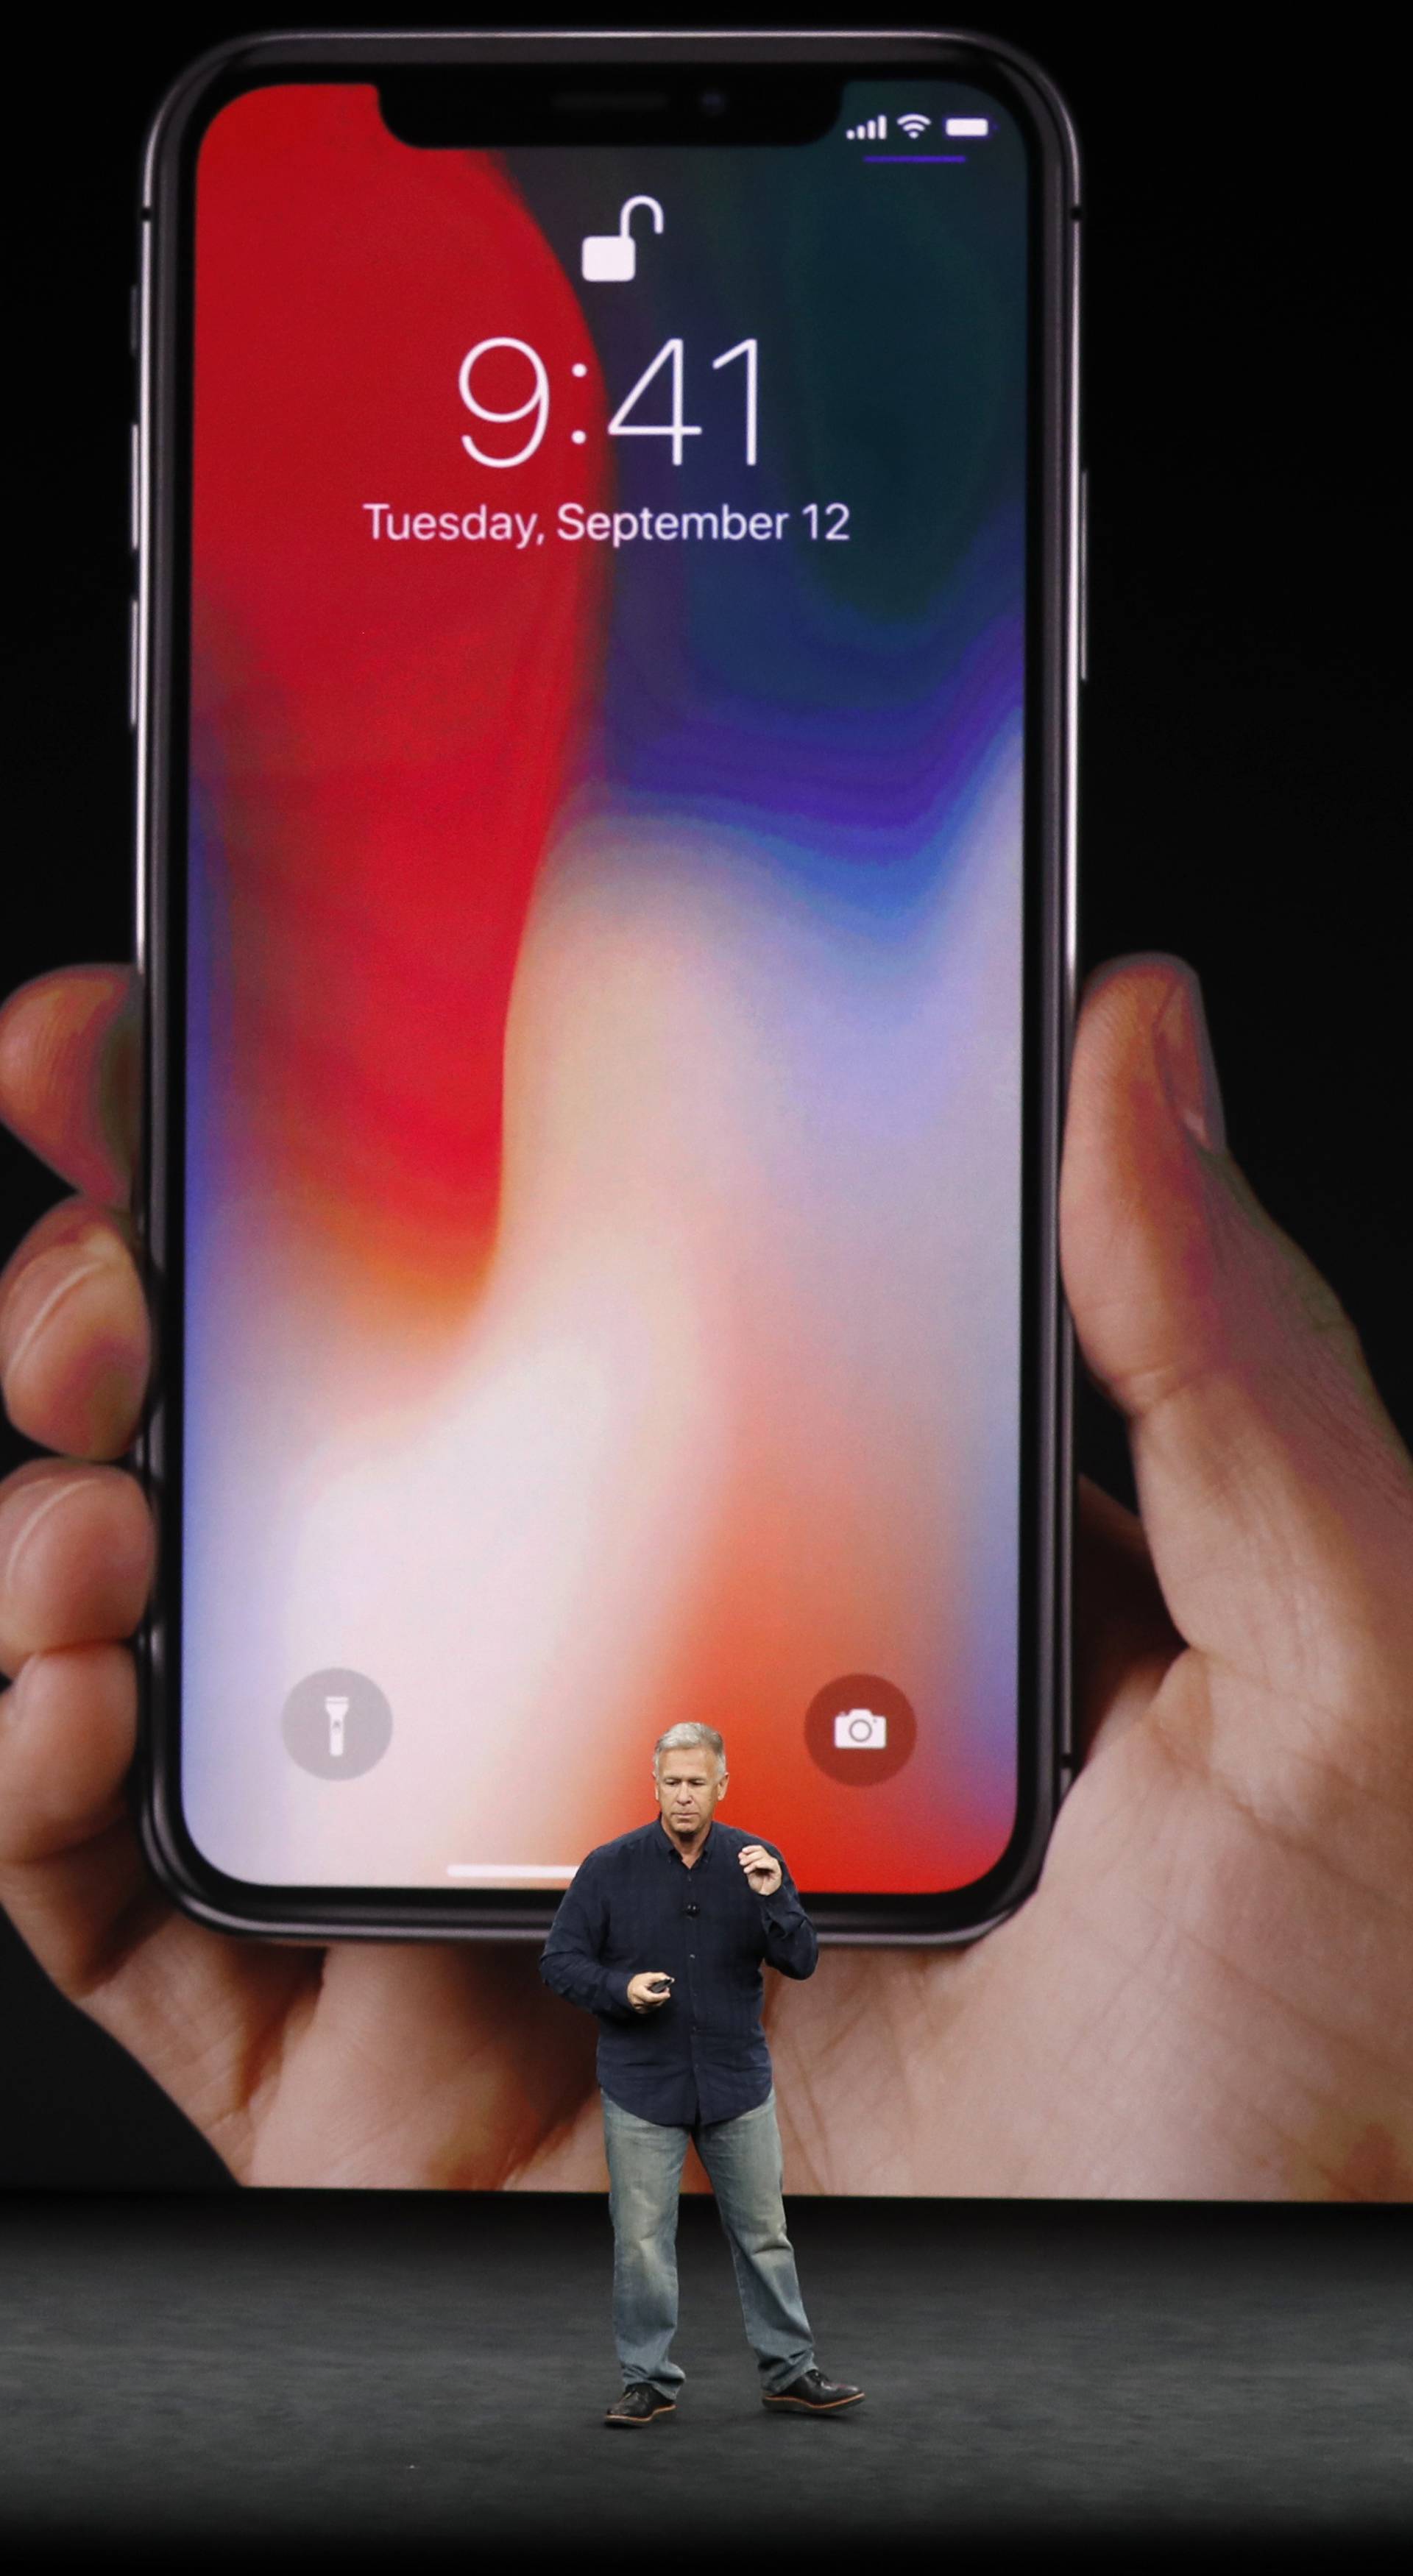 Apple's Schiller introduces the iPhone x during a launch event in Cupertino